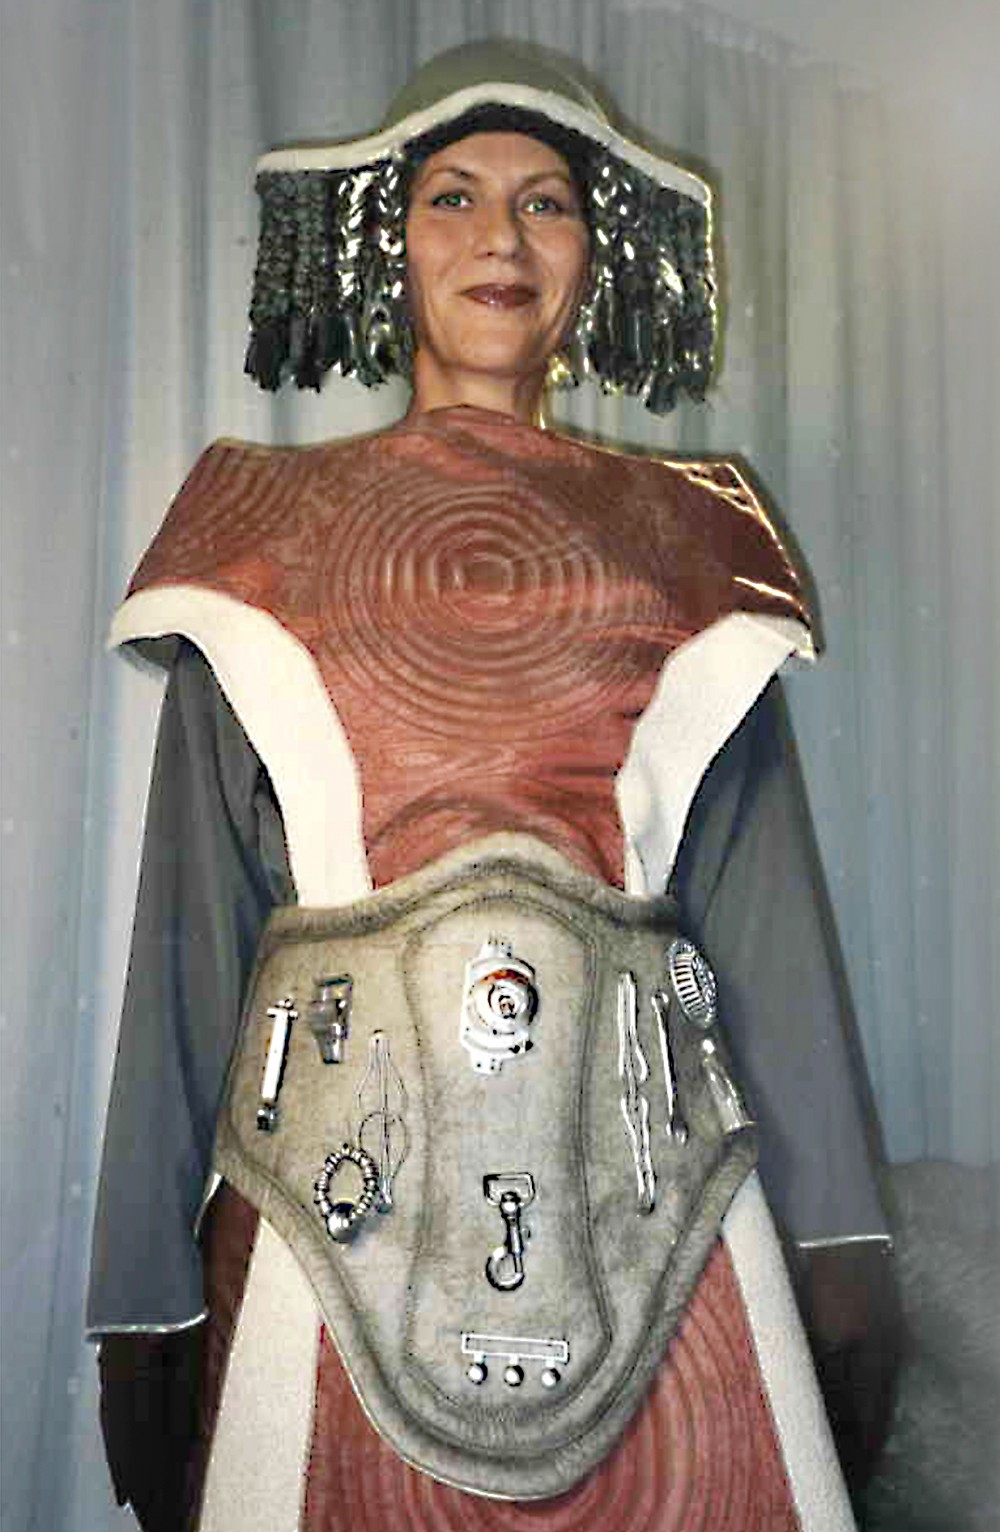 A model wearing the Frigg costume